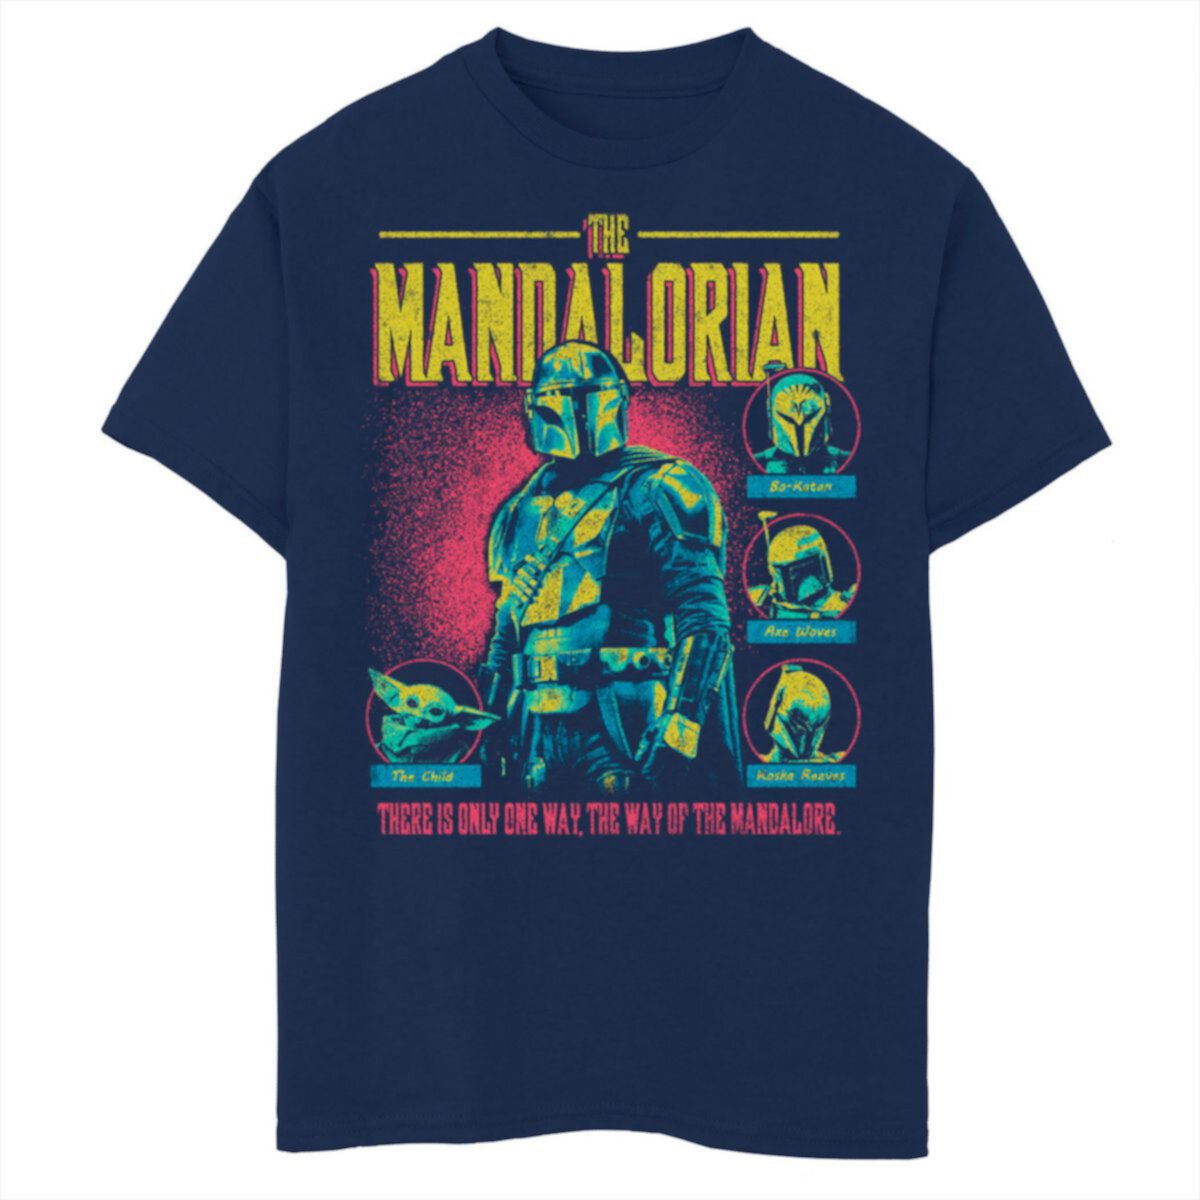 Boys Husky Star Wars The Mandalorian Group Shot One Way Only Graphic Tee Star Wars